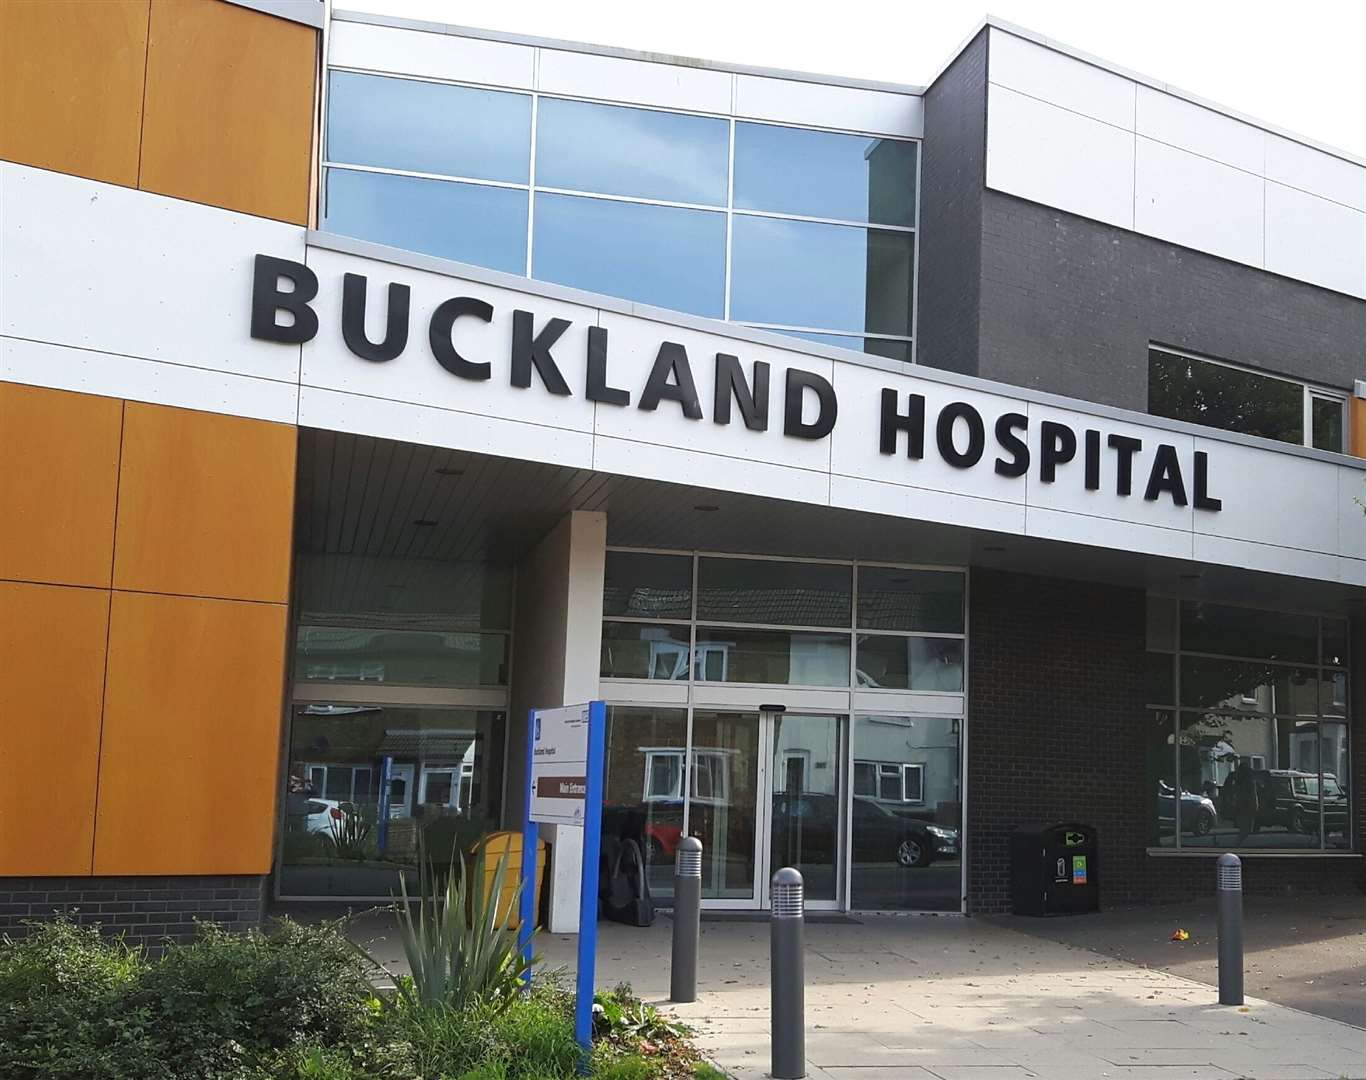 The dementia village will be just behind the present Buckland Hospital